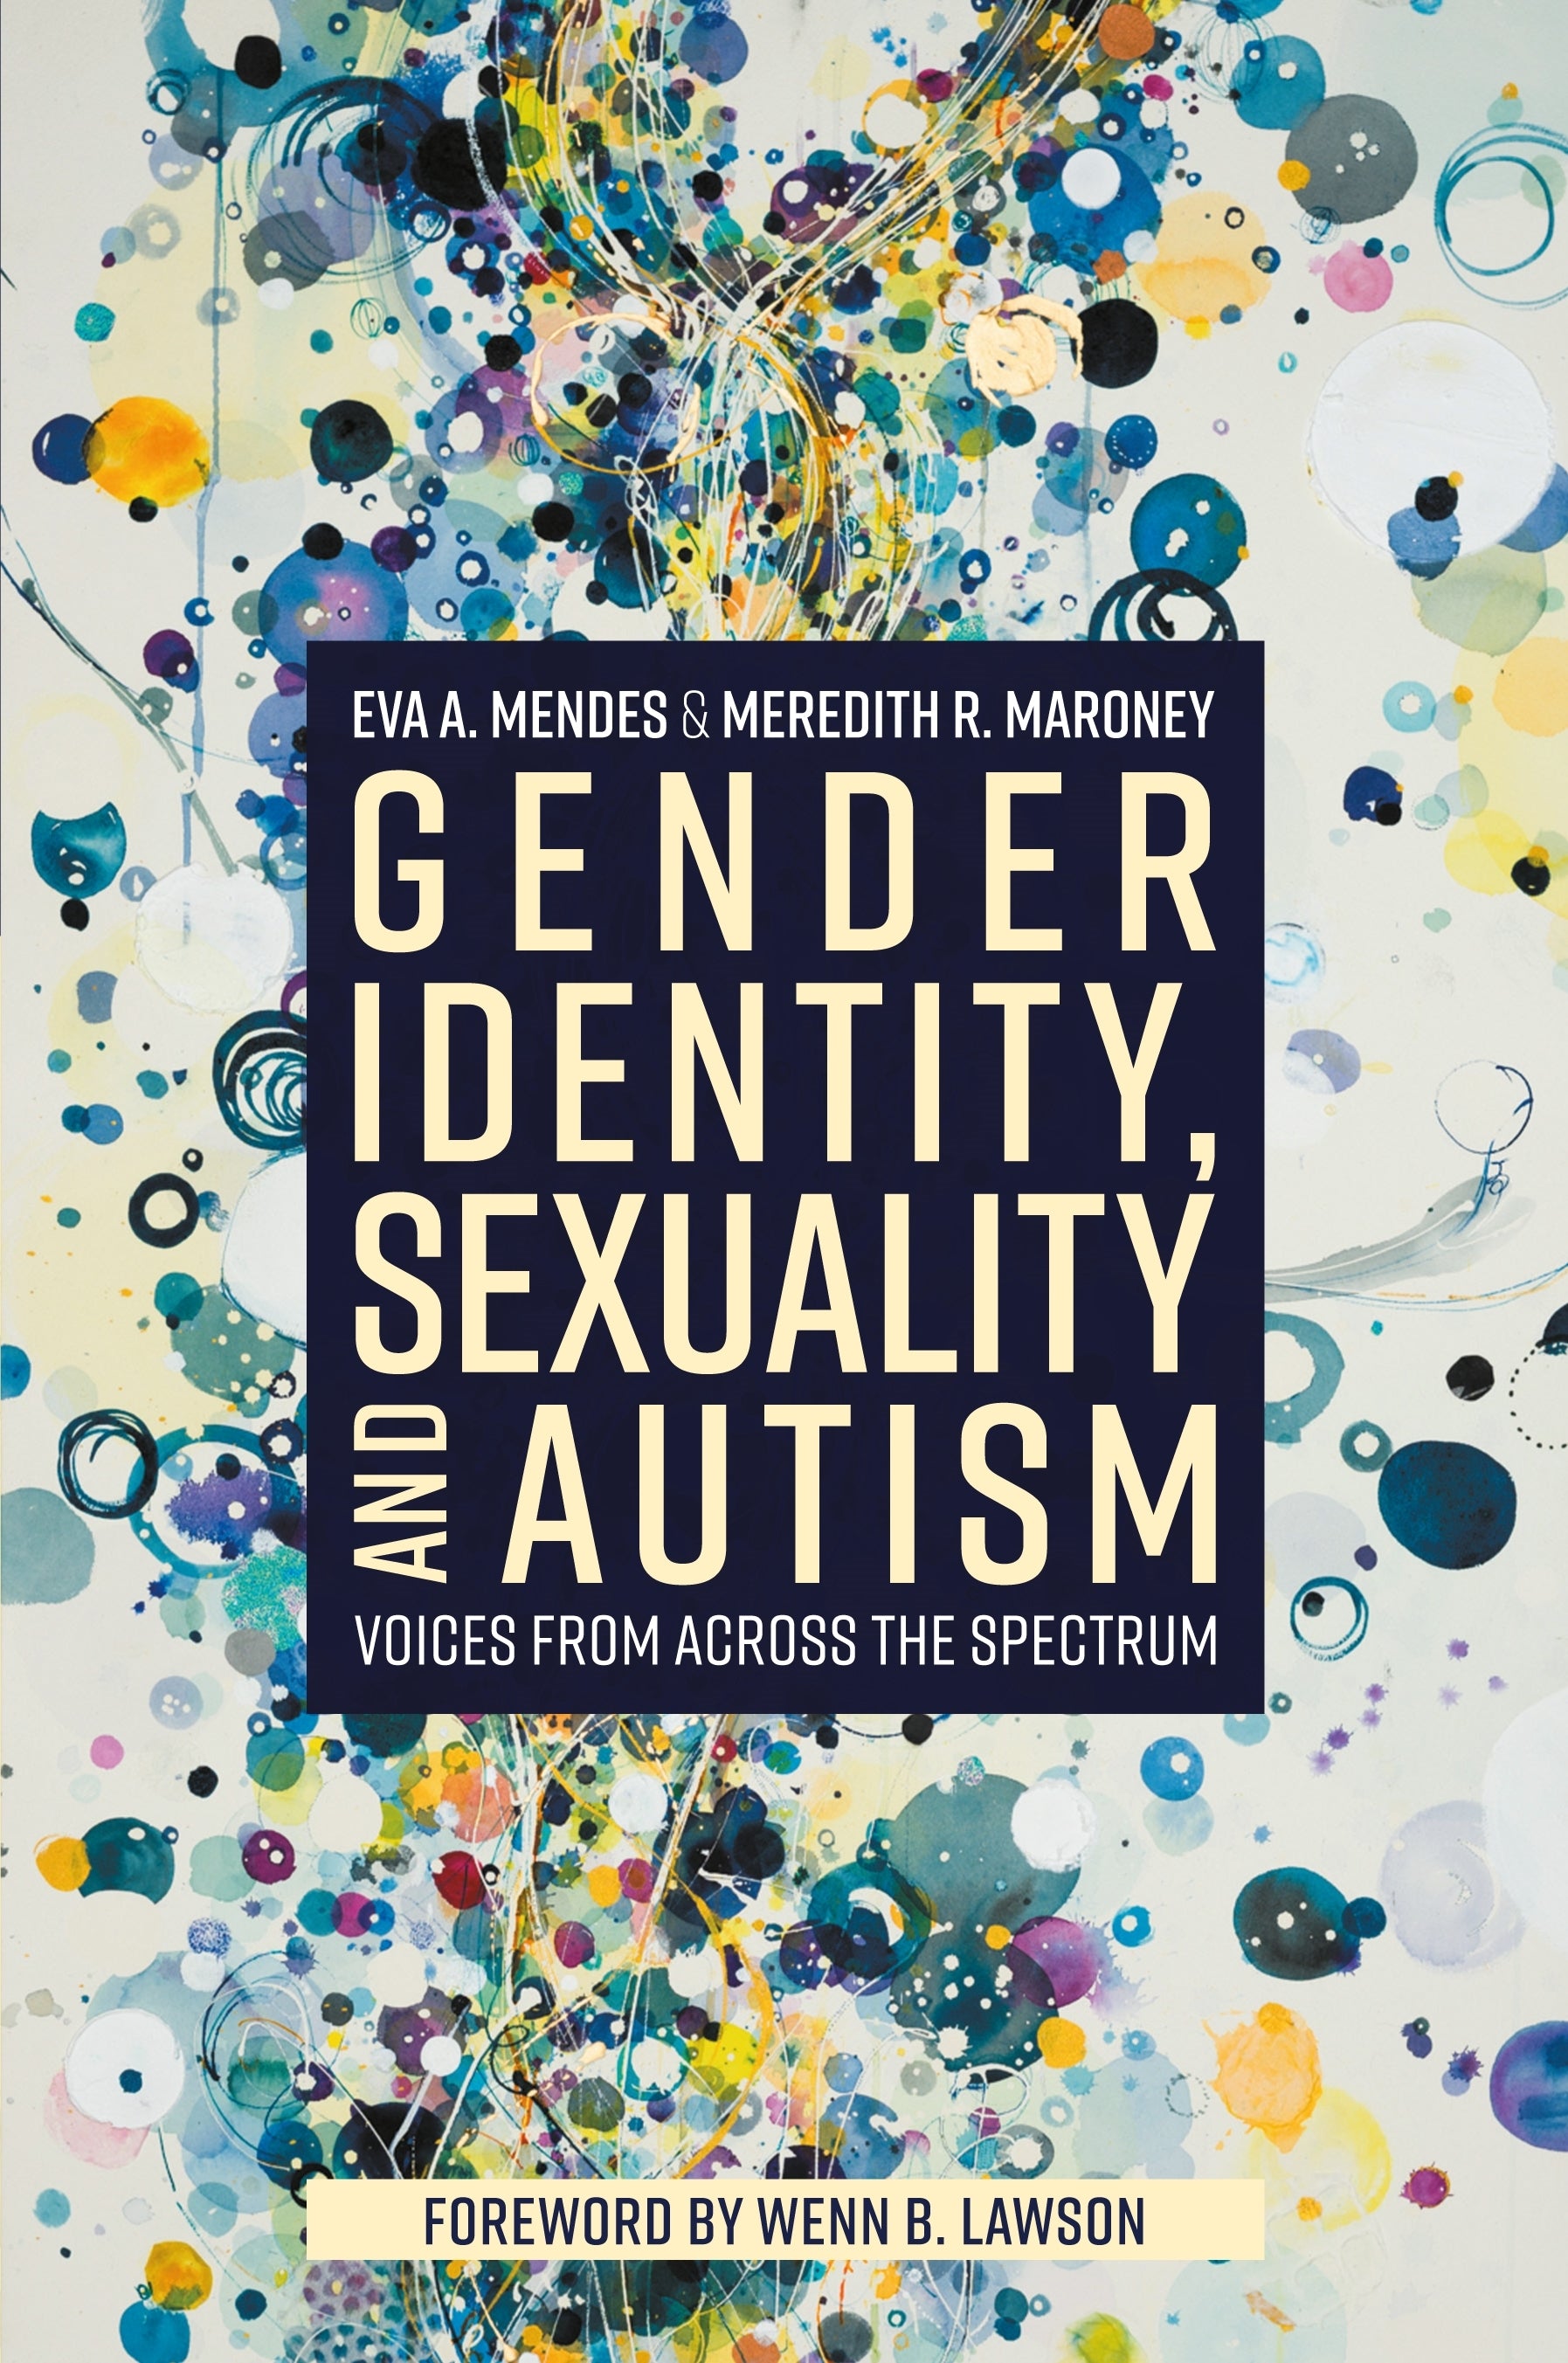 Gender Identity, Sexuality and Autism by Eva A. Mendes, Wenn Lawson, Meredith R. Maroney